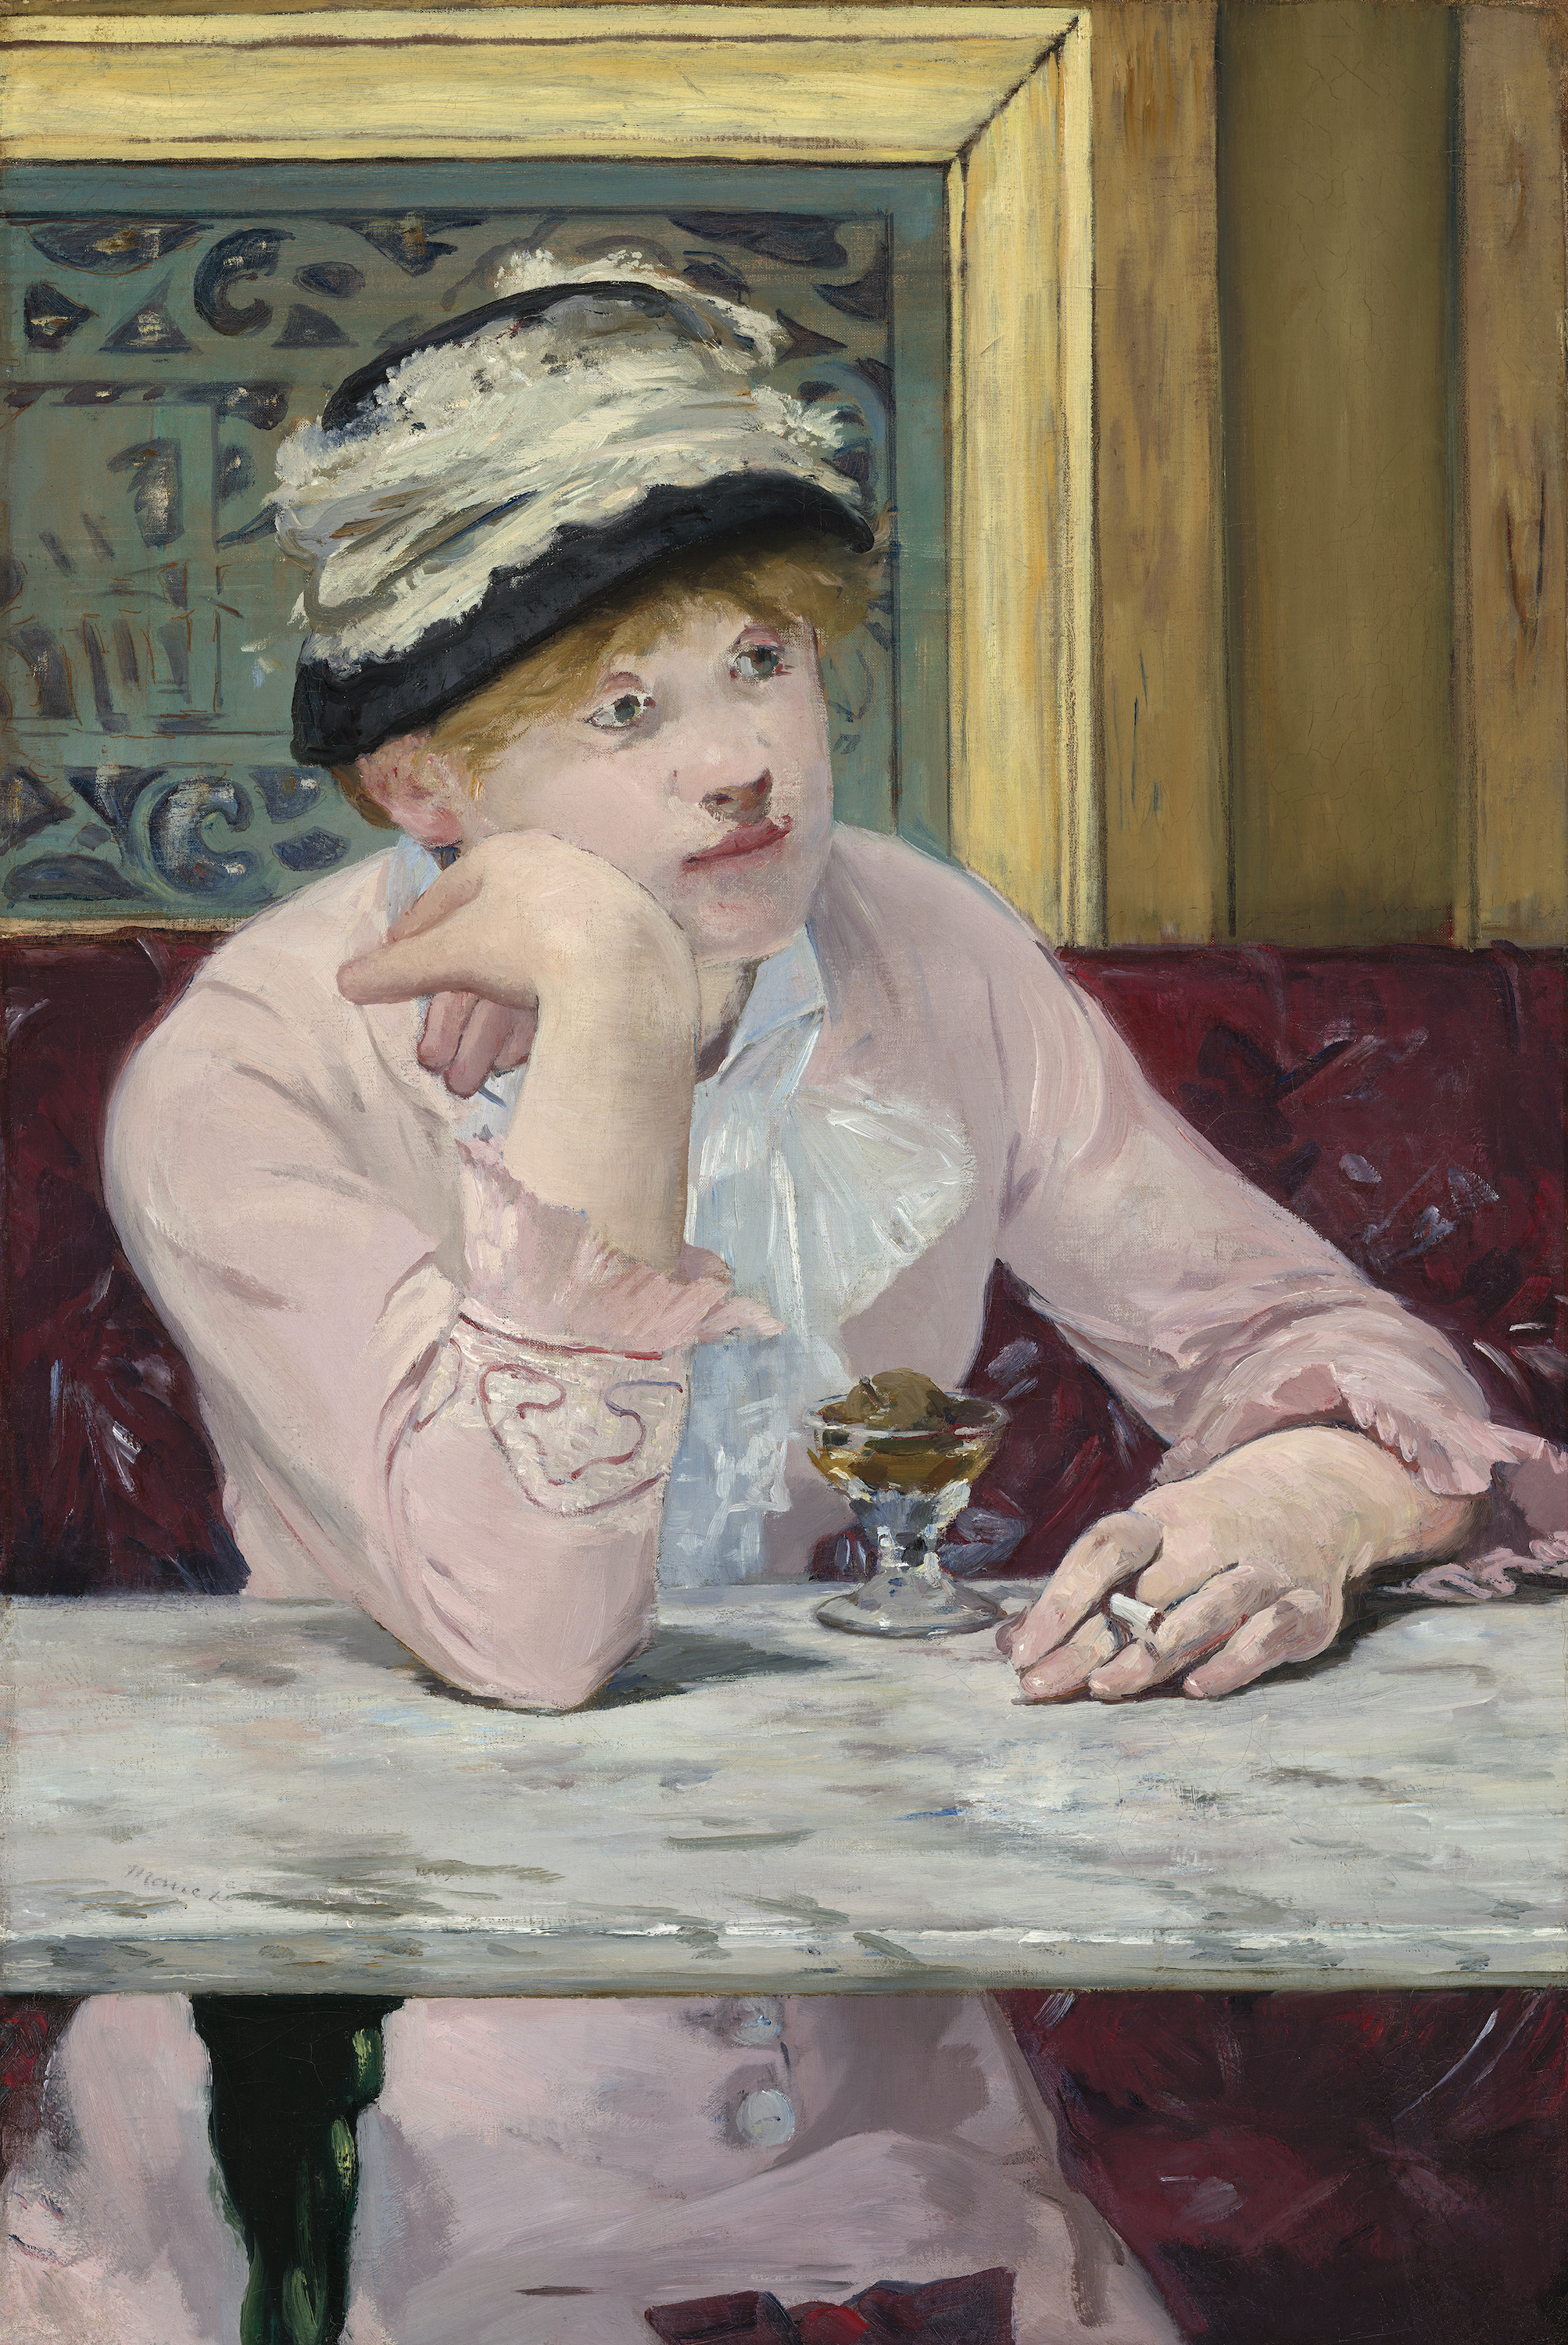 Pflaumenschnaps by Édouard Manet - ca. 1877 - 73,6 x 50,2 cm National Gallery of Art